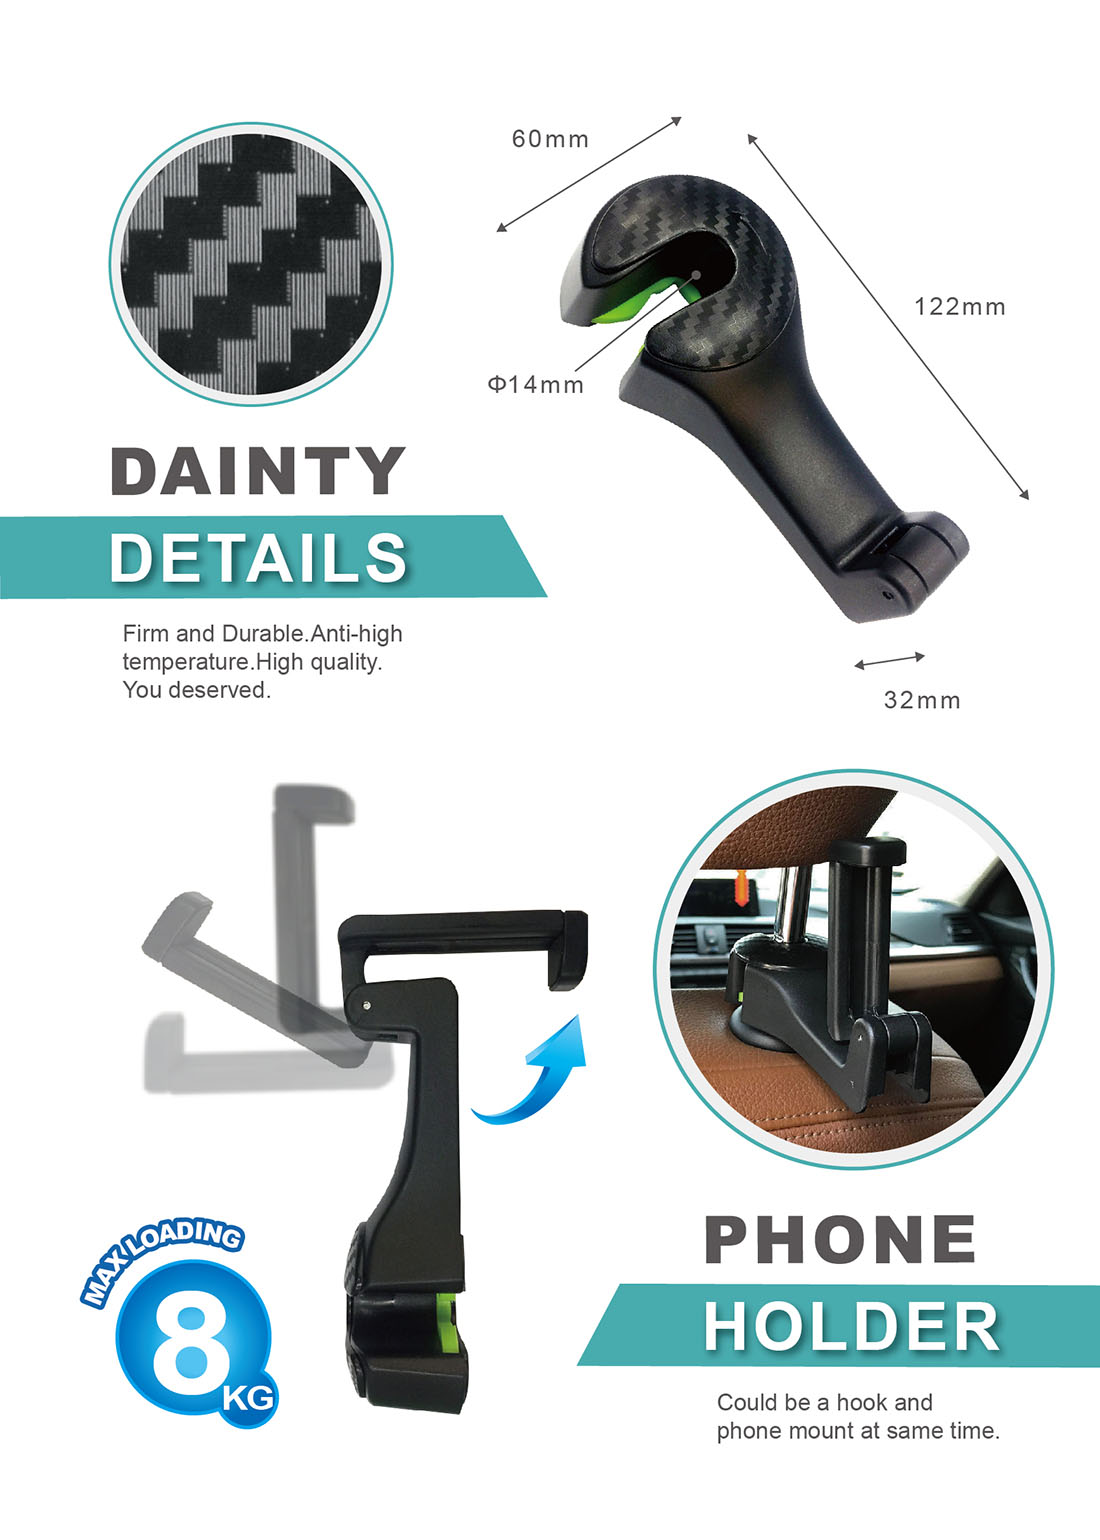 CAR HEADEREST HOOK WITH PHONE MOUNT HPA526